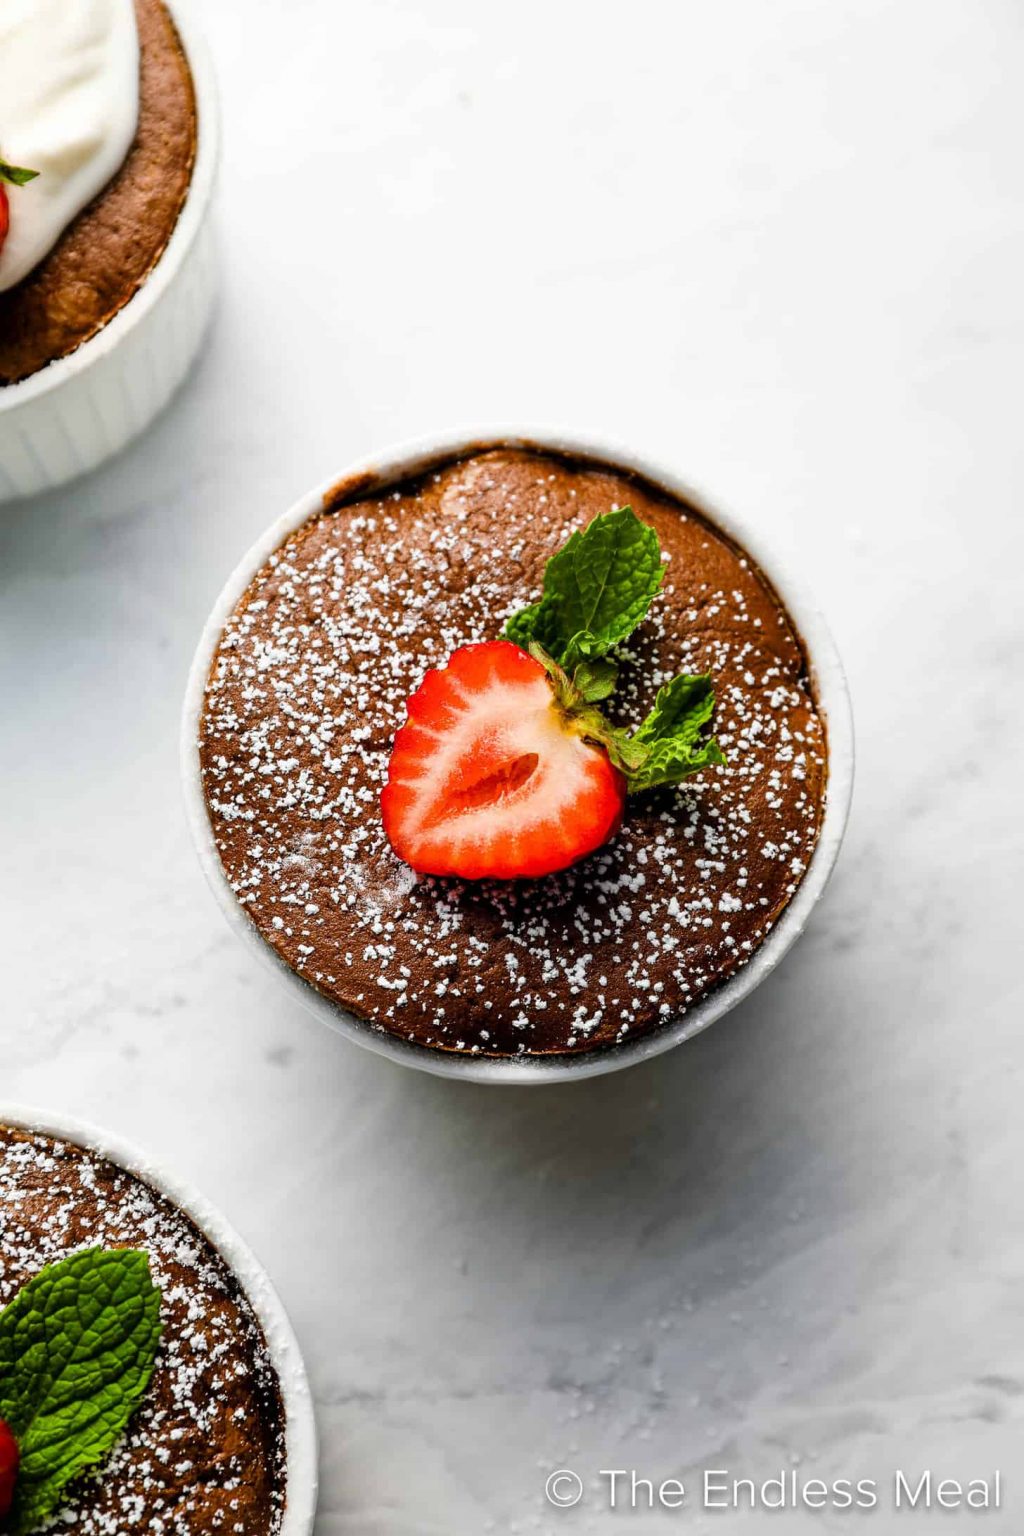 A Chocolate Soufflé hot out of the oven.